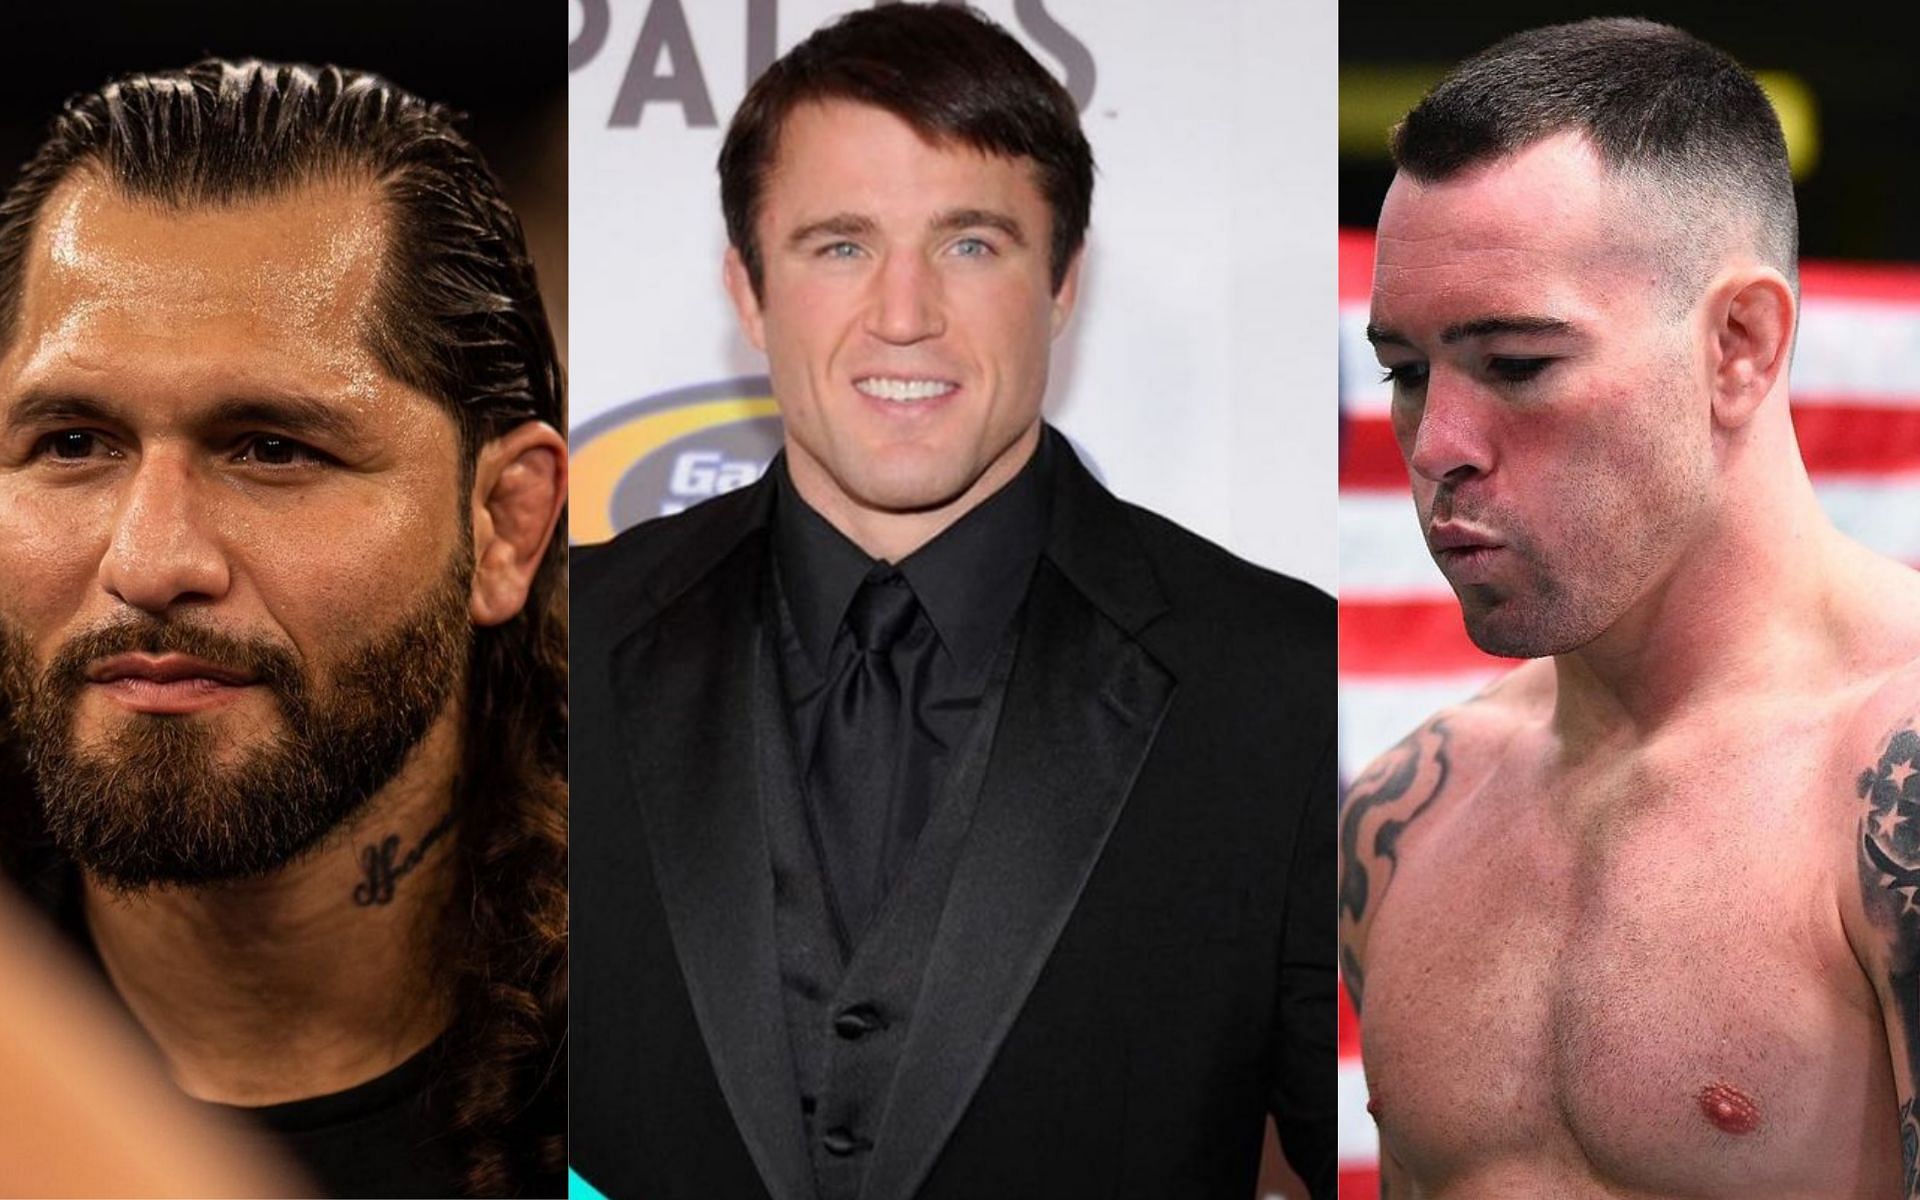 Chael Sonnen didn&#039;t hold back from poking fun at renowned UFC fighters like Jorge Masvidal and Colby Covington at the WMMA award function. [Credits: @gamebredfighter, @colbycovmma, @sonnench via Instagram]